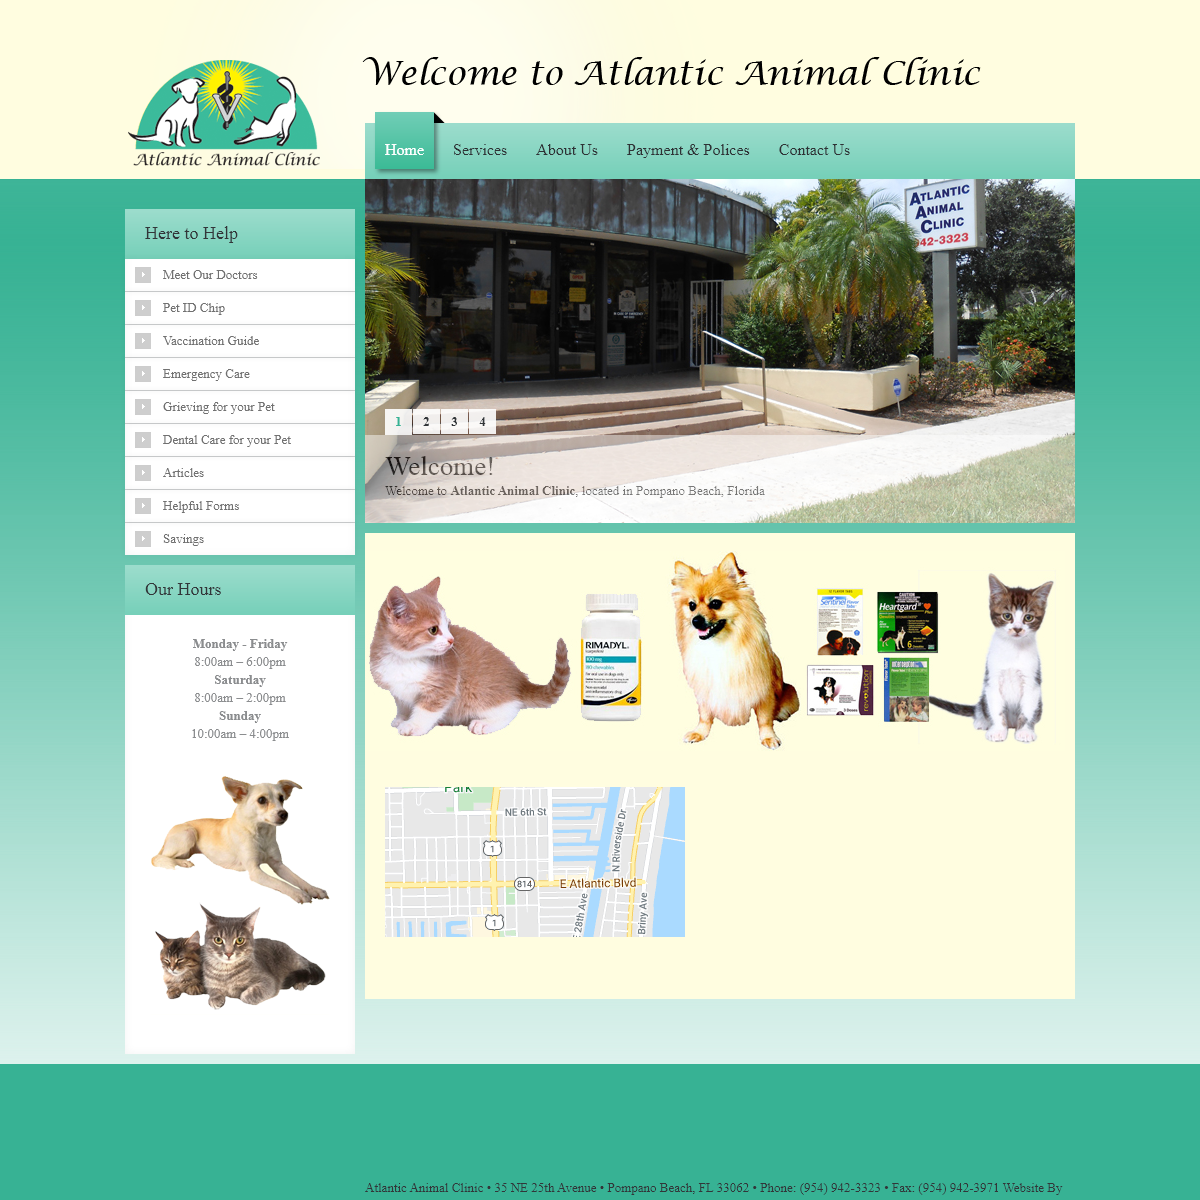 A complete backup of atlantic-animal-clinic.com